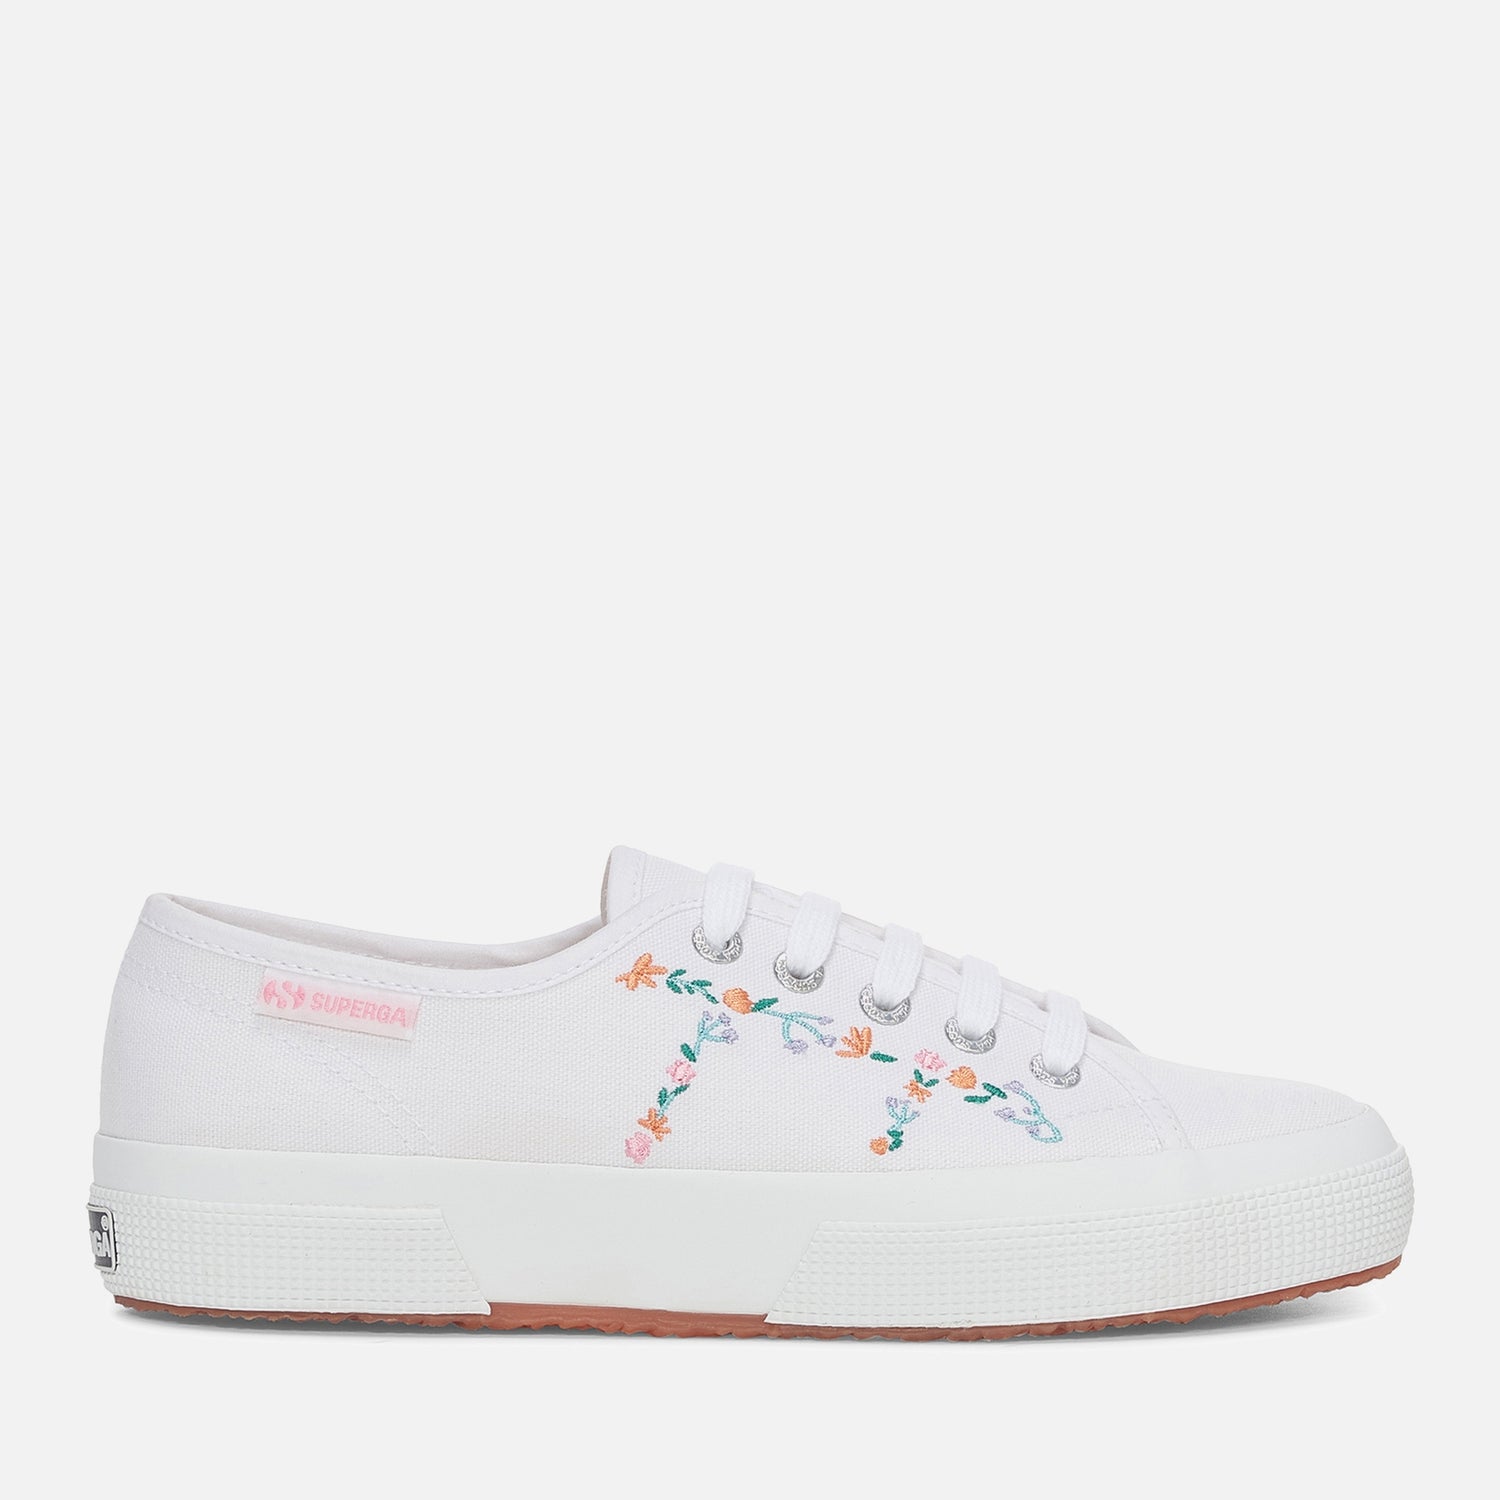 Superga Women's 2750 Floral-Embroidered Canvas Trainers - UK 3